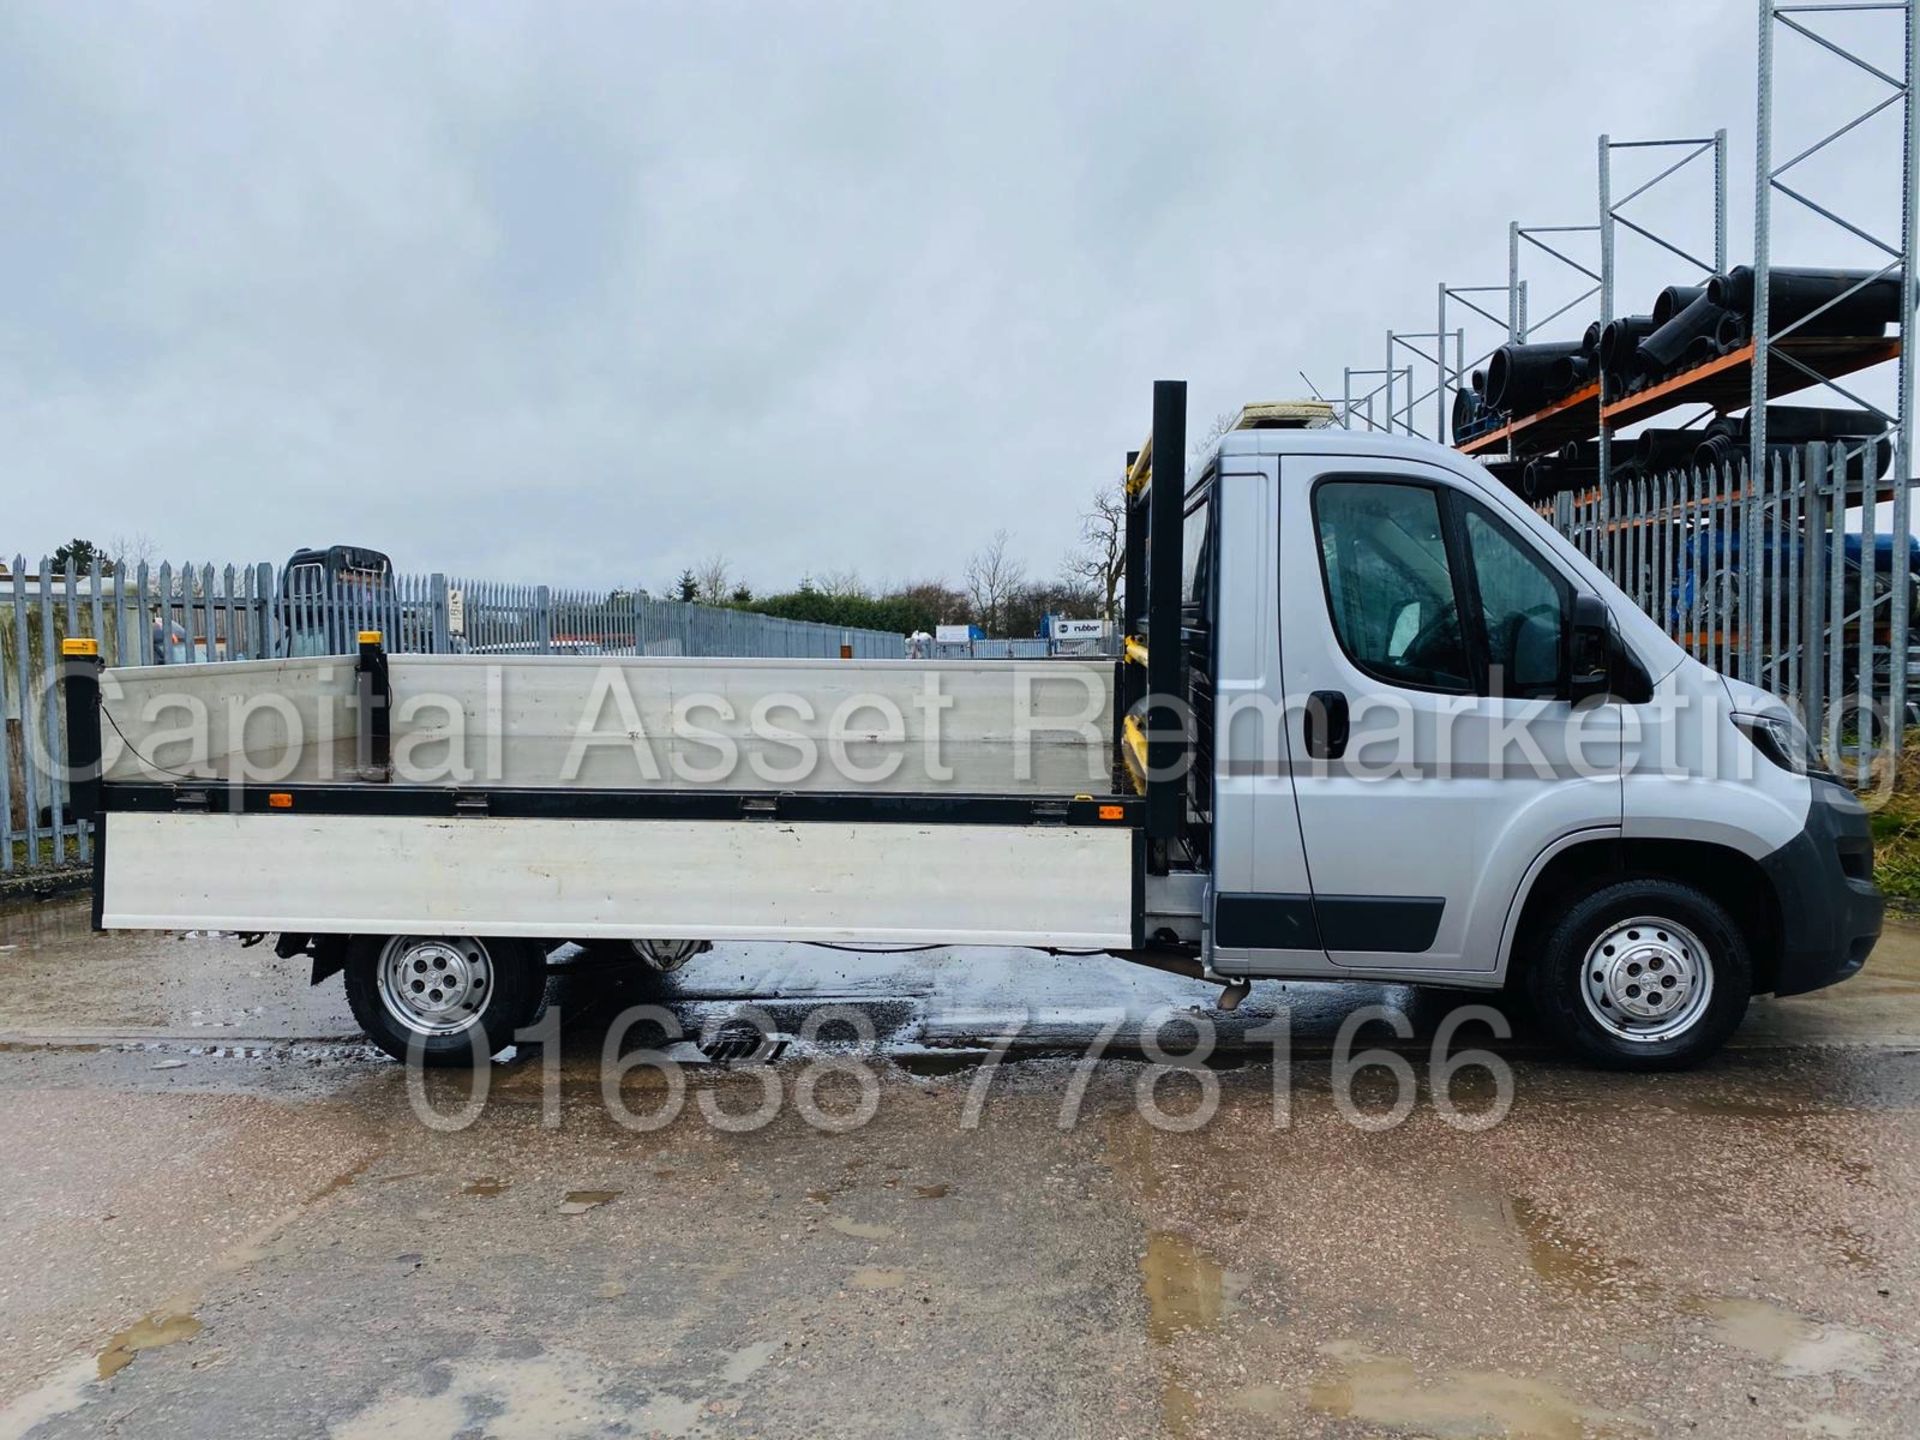 (On Sale) PEUGEOT BOXER 335 *LWB - ALLOY DROPSIDE TRUCK* (65 REG) '2.2 HDI - 6 SPEED' (3500 KG) - Image 10 of 32